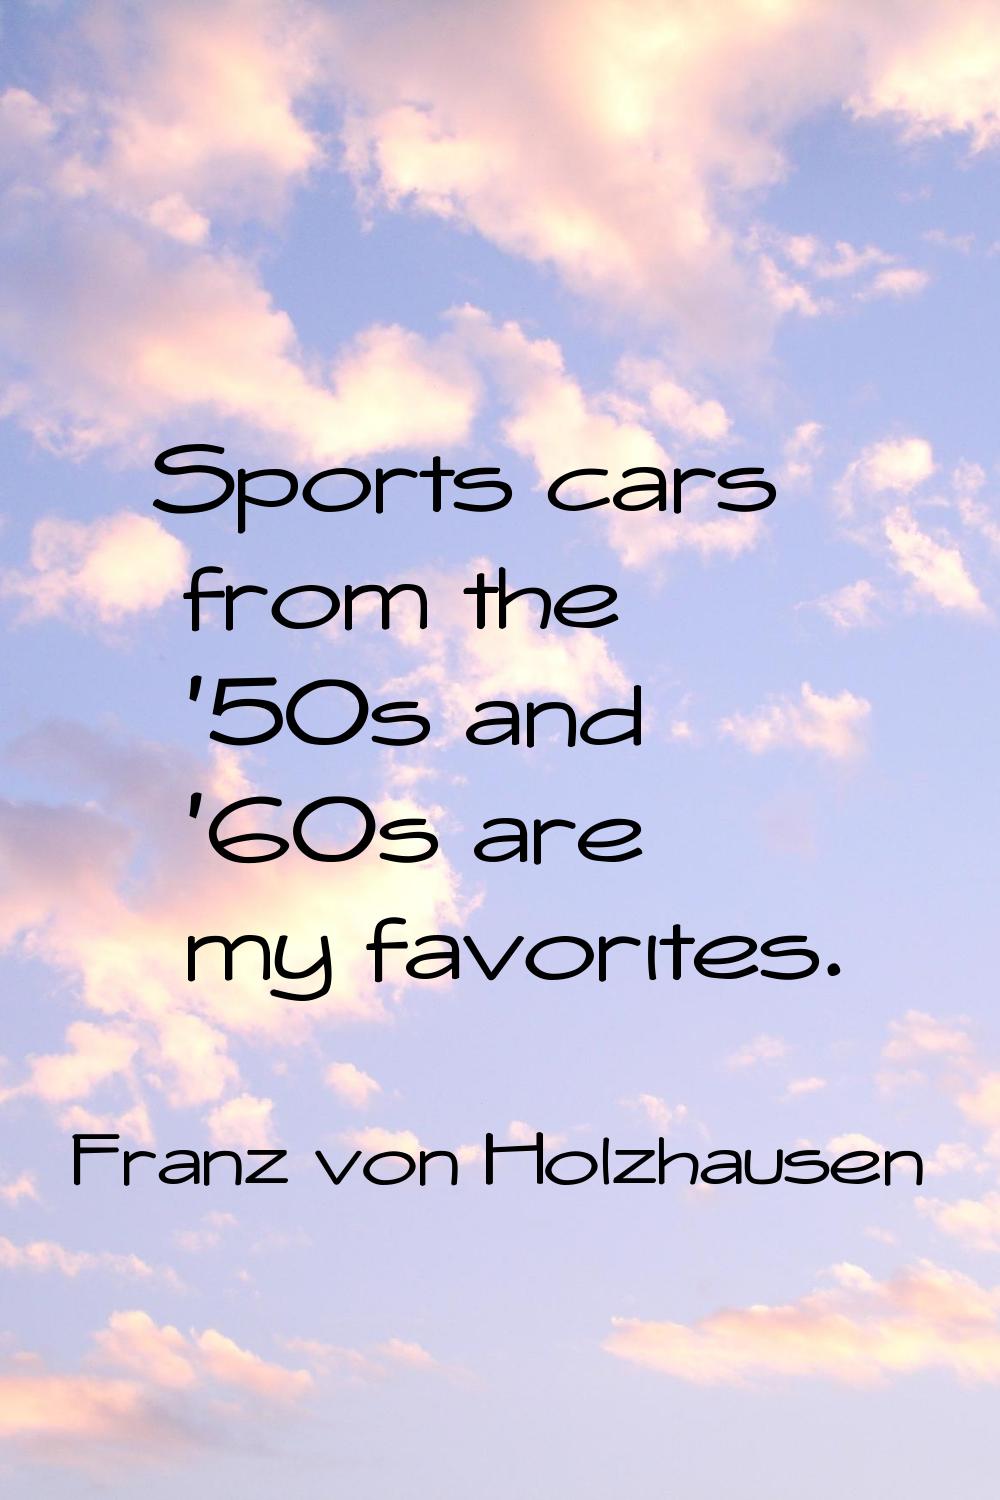 Sports cars from the '50s and '60s are my favorites.